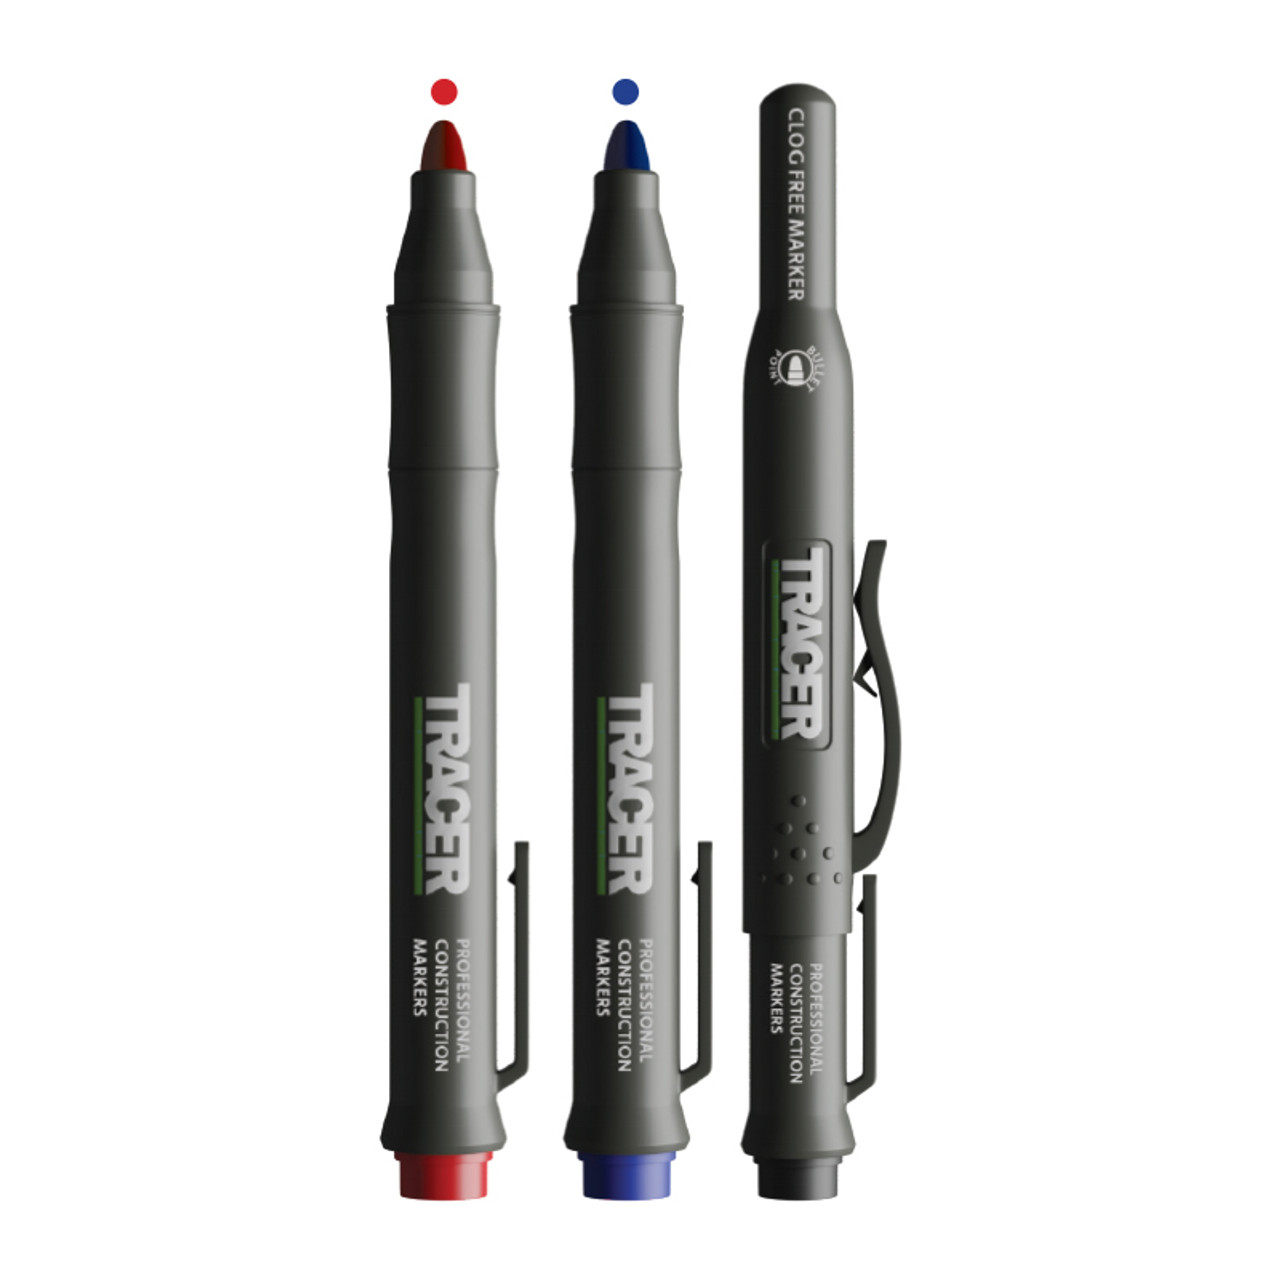 TRACER Clog Free Marker Set - 3pc pack (1x Black / 1x Blue / 1x Red) with  Site Holsters. - Quinny Supplies